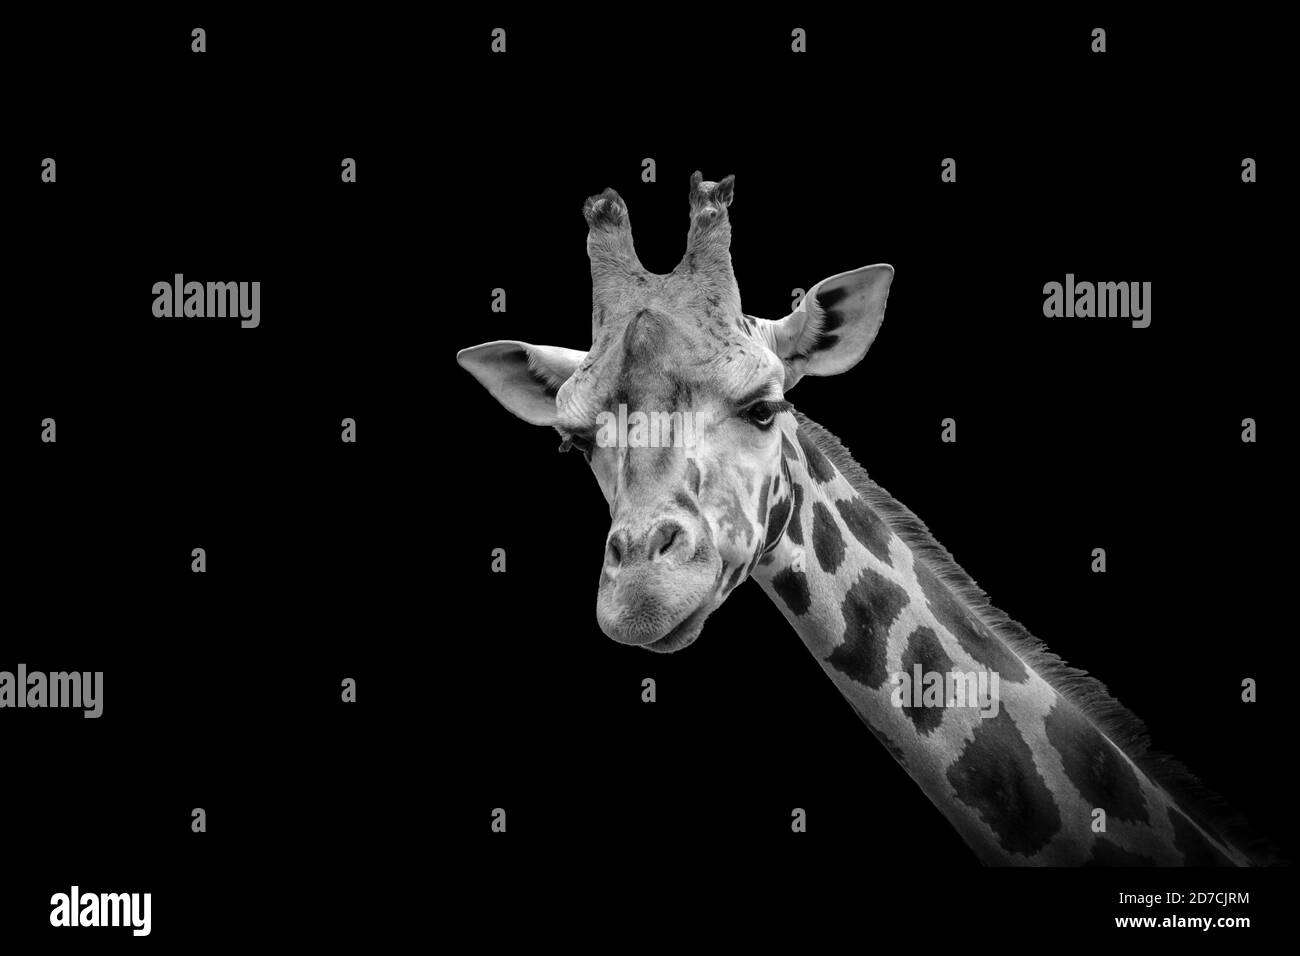 Black and white giraffe head isolated on black background. Stock Photo